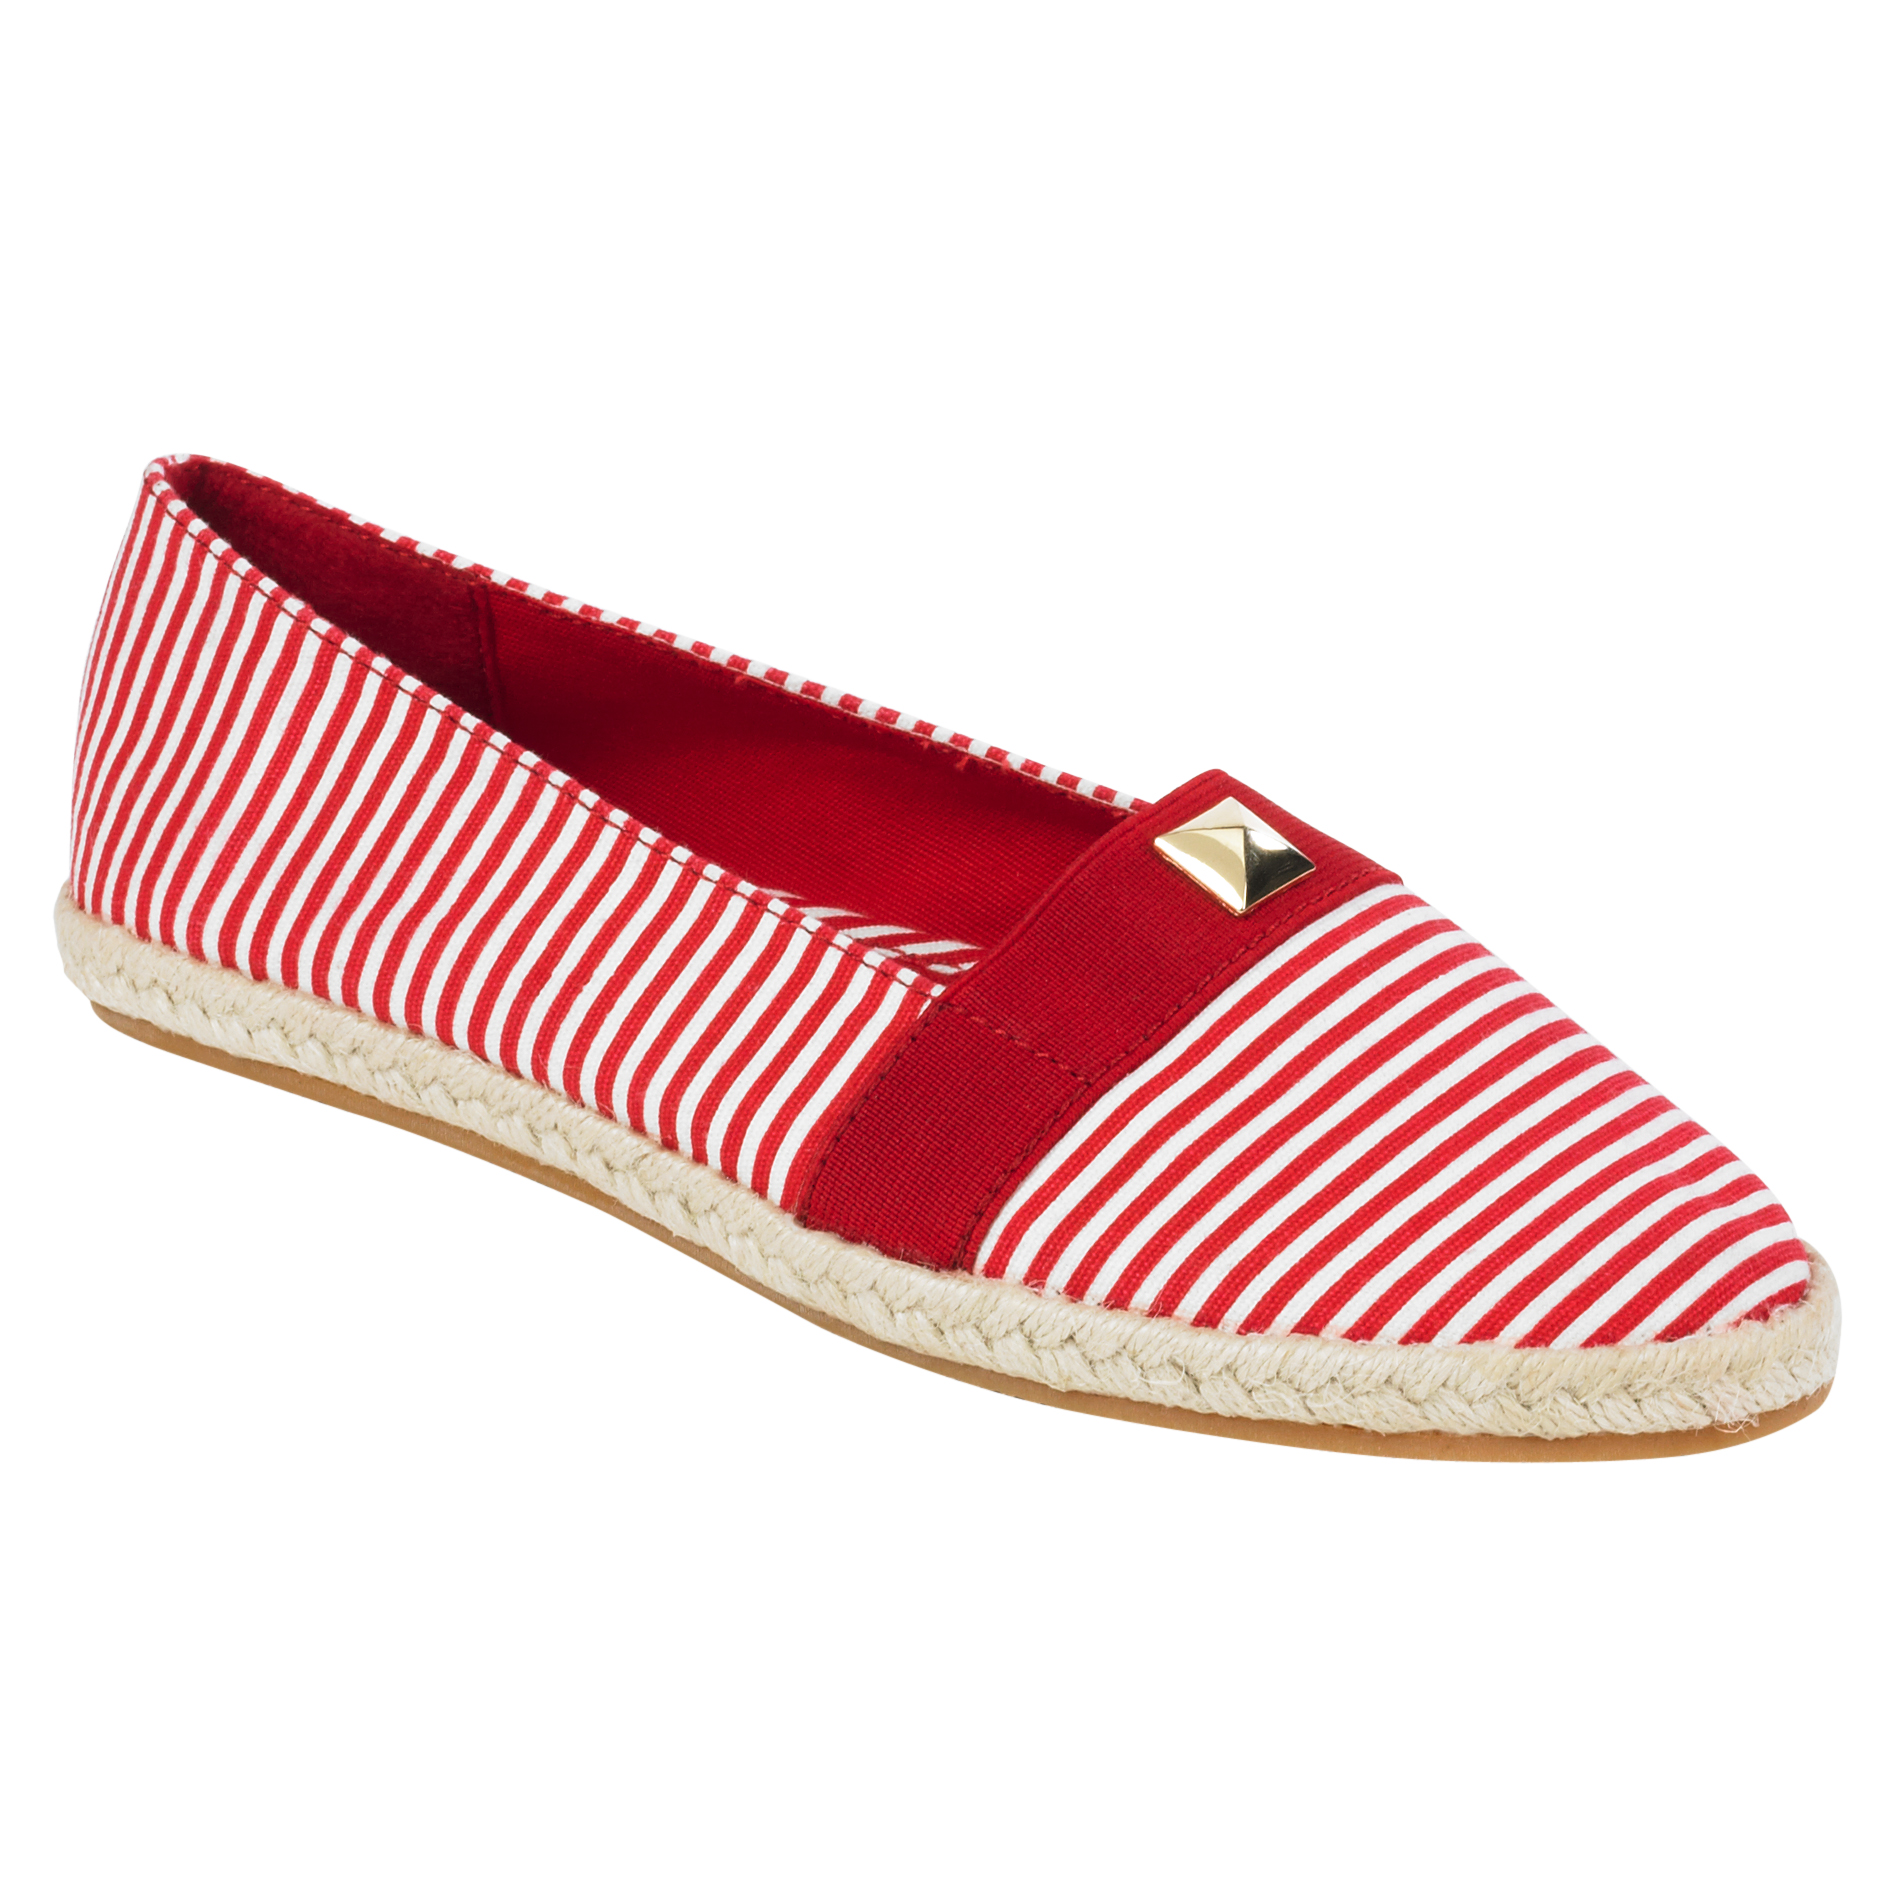 Soft Style by Hush Puppies Women's Casual Hillary - Red